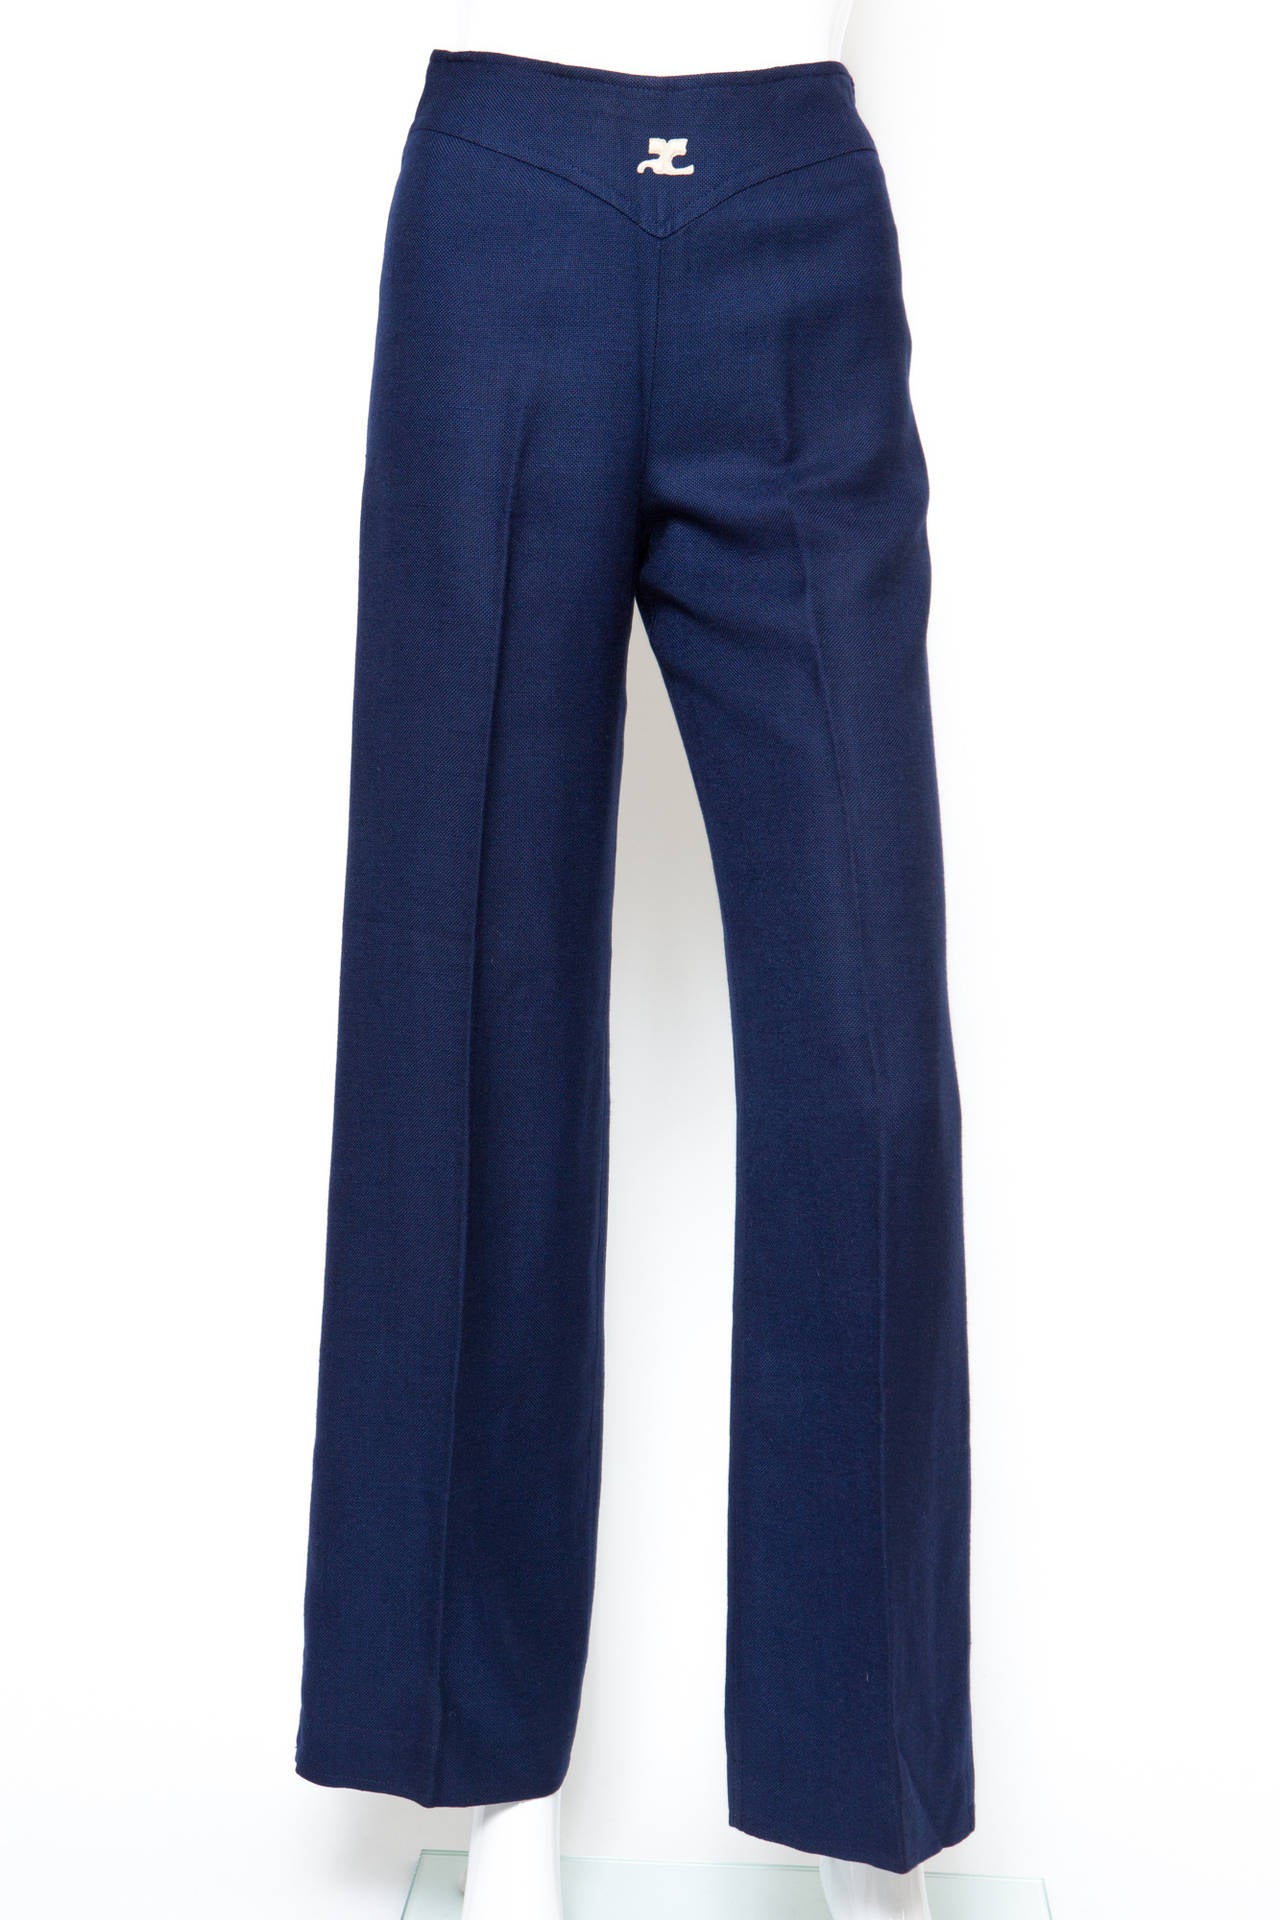 Navy high waisted flared trousers (total bottom leg 56cm) from Courrèges featuring a concealed side zip fastening, a wide leg and a front white logo embroidered. Fully lined. Viscose 100%. Numbered pant : 92194
Trousers size : OO Estimated size :